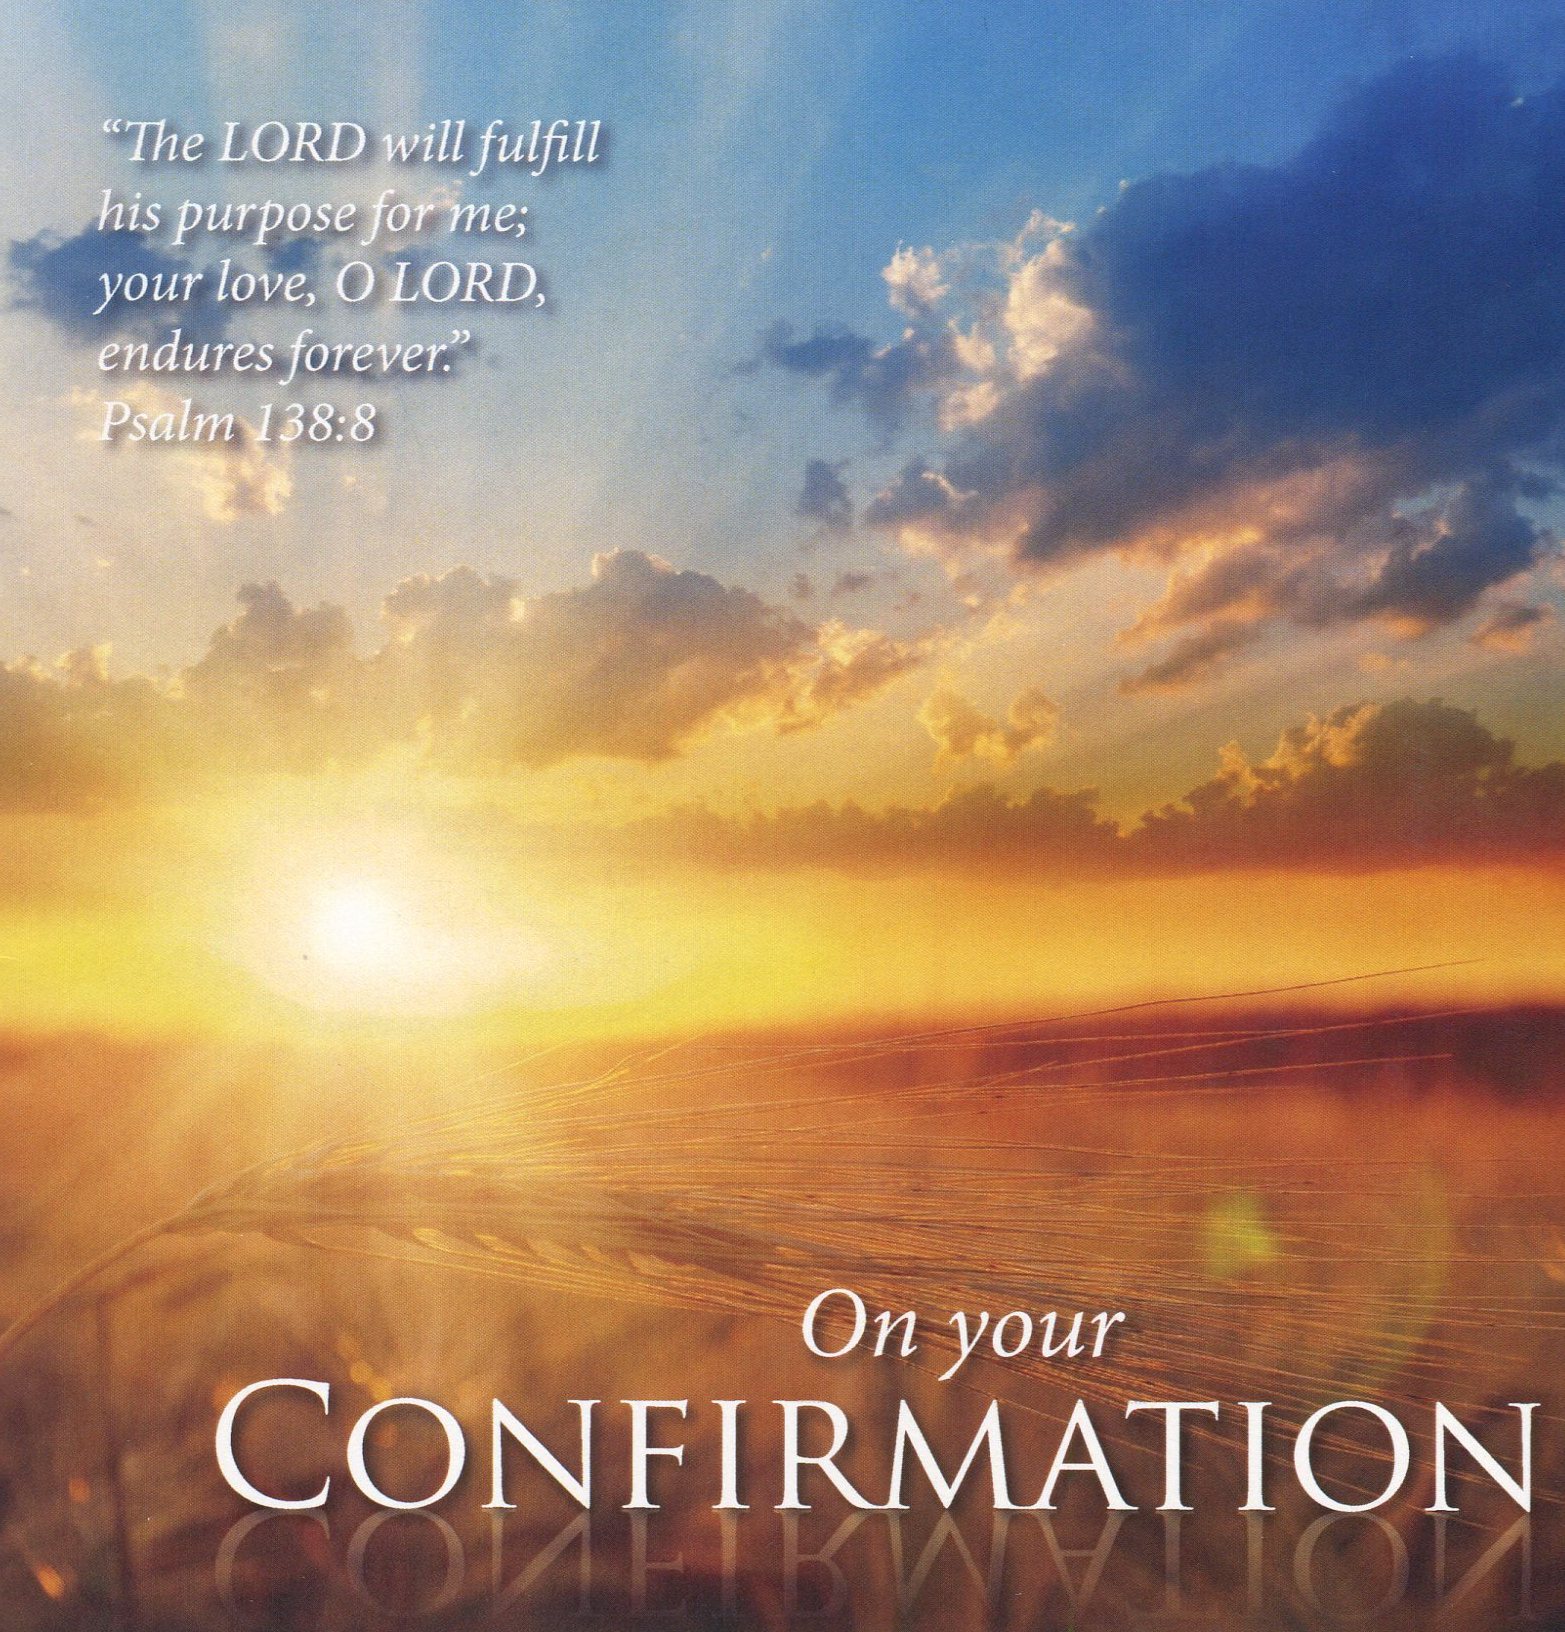 On Your Confirmation - Single Card